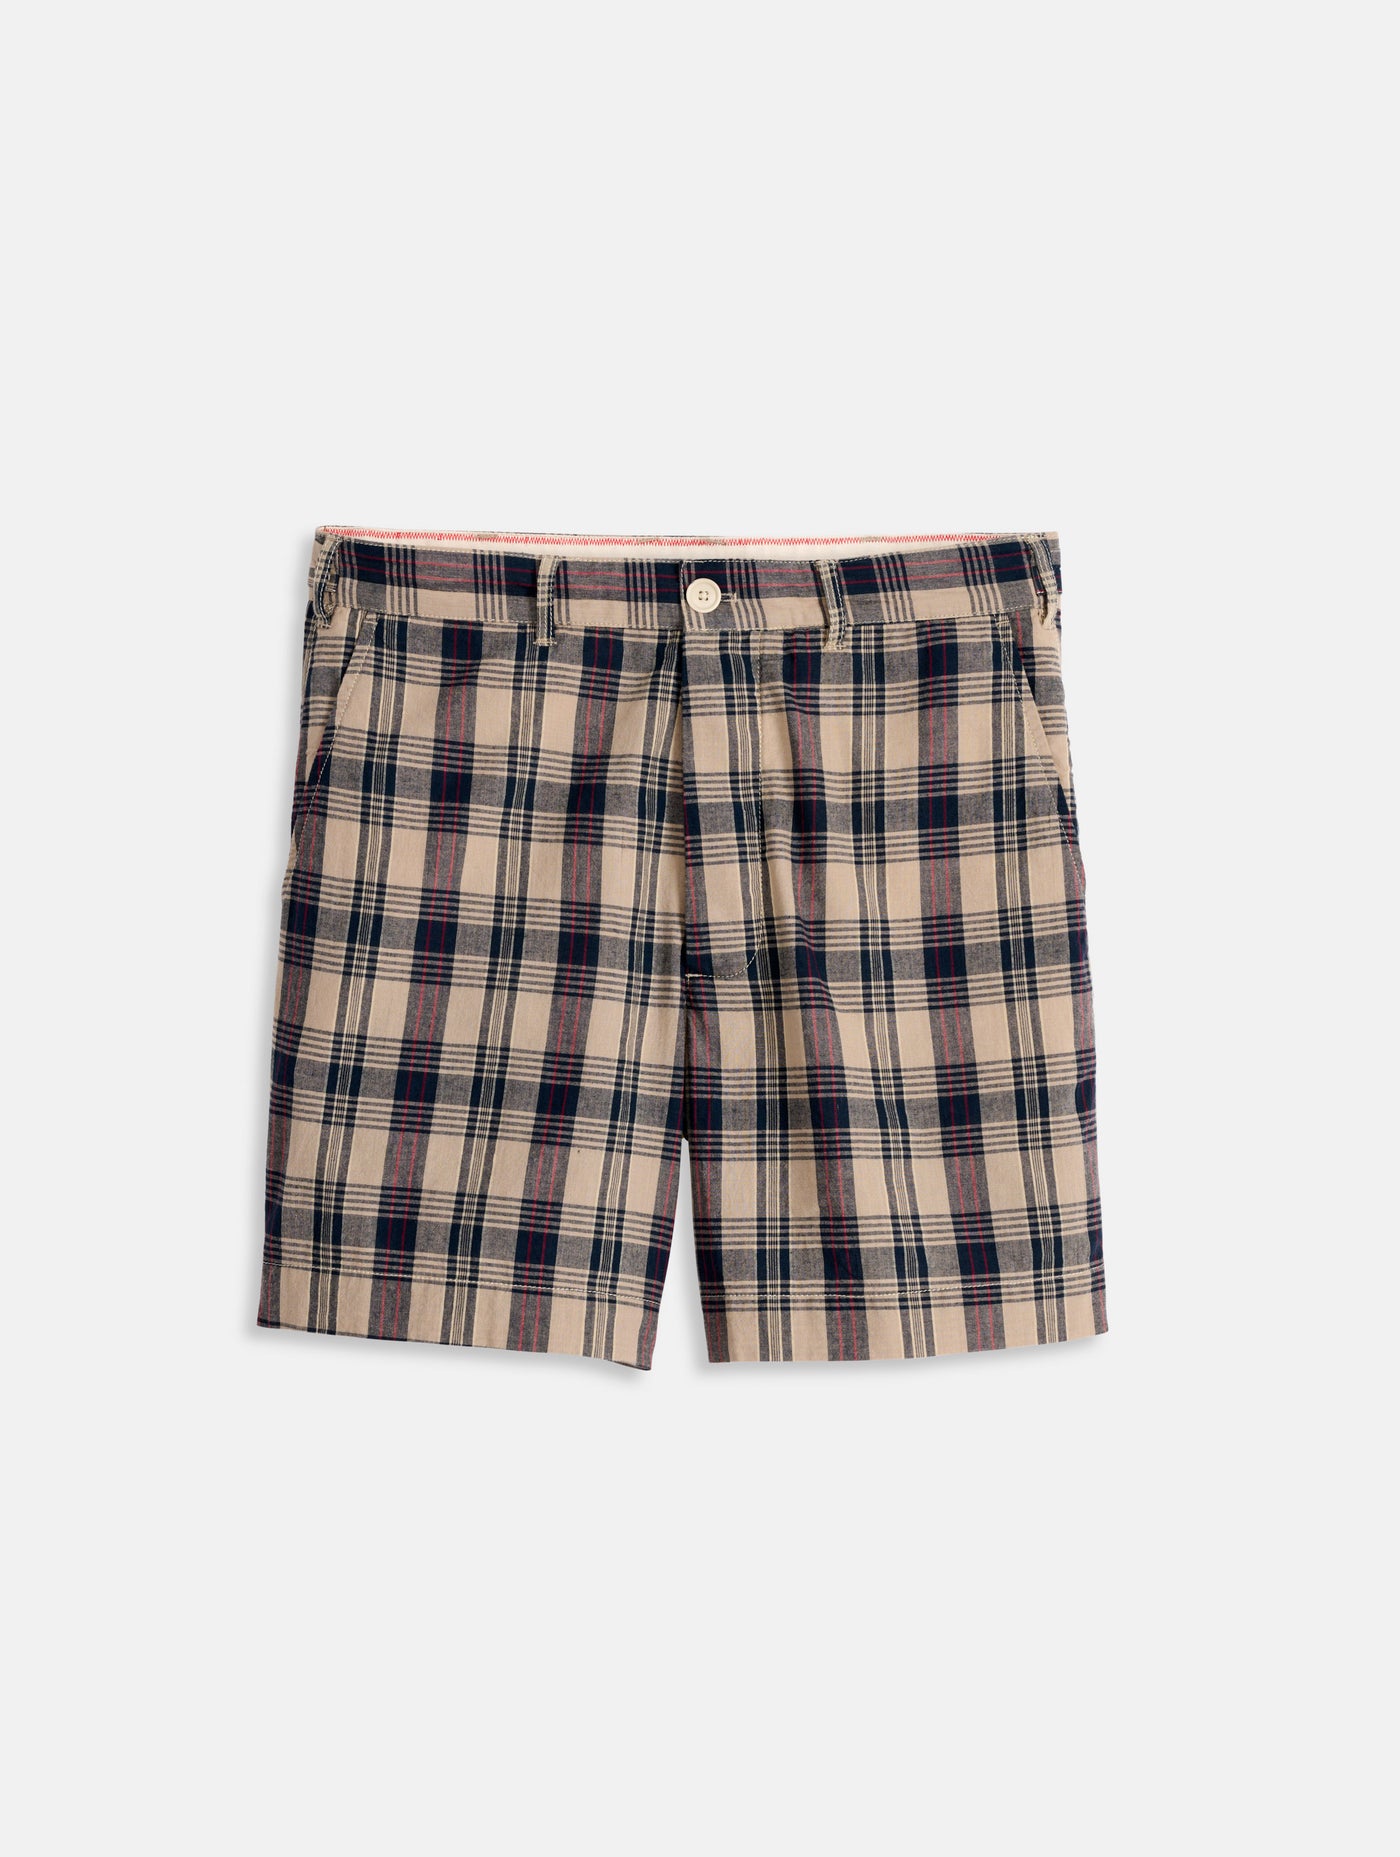 Flat Front Shorts in Madras